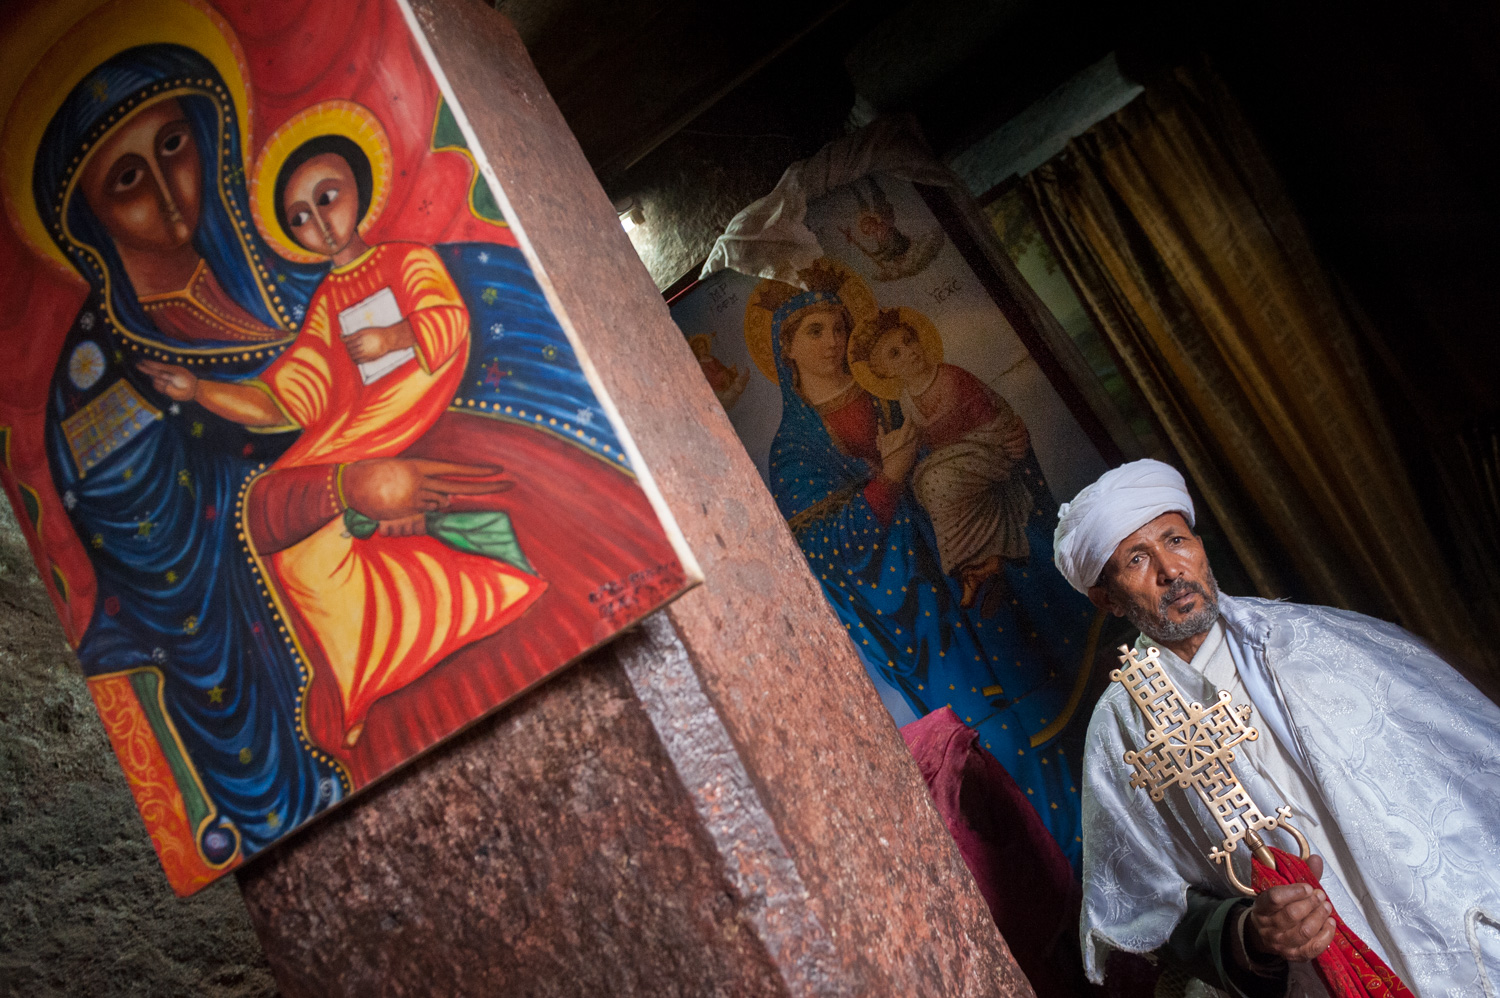 Priest and icons in monolithic church - Lalibela, Ethiopia